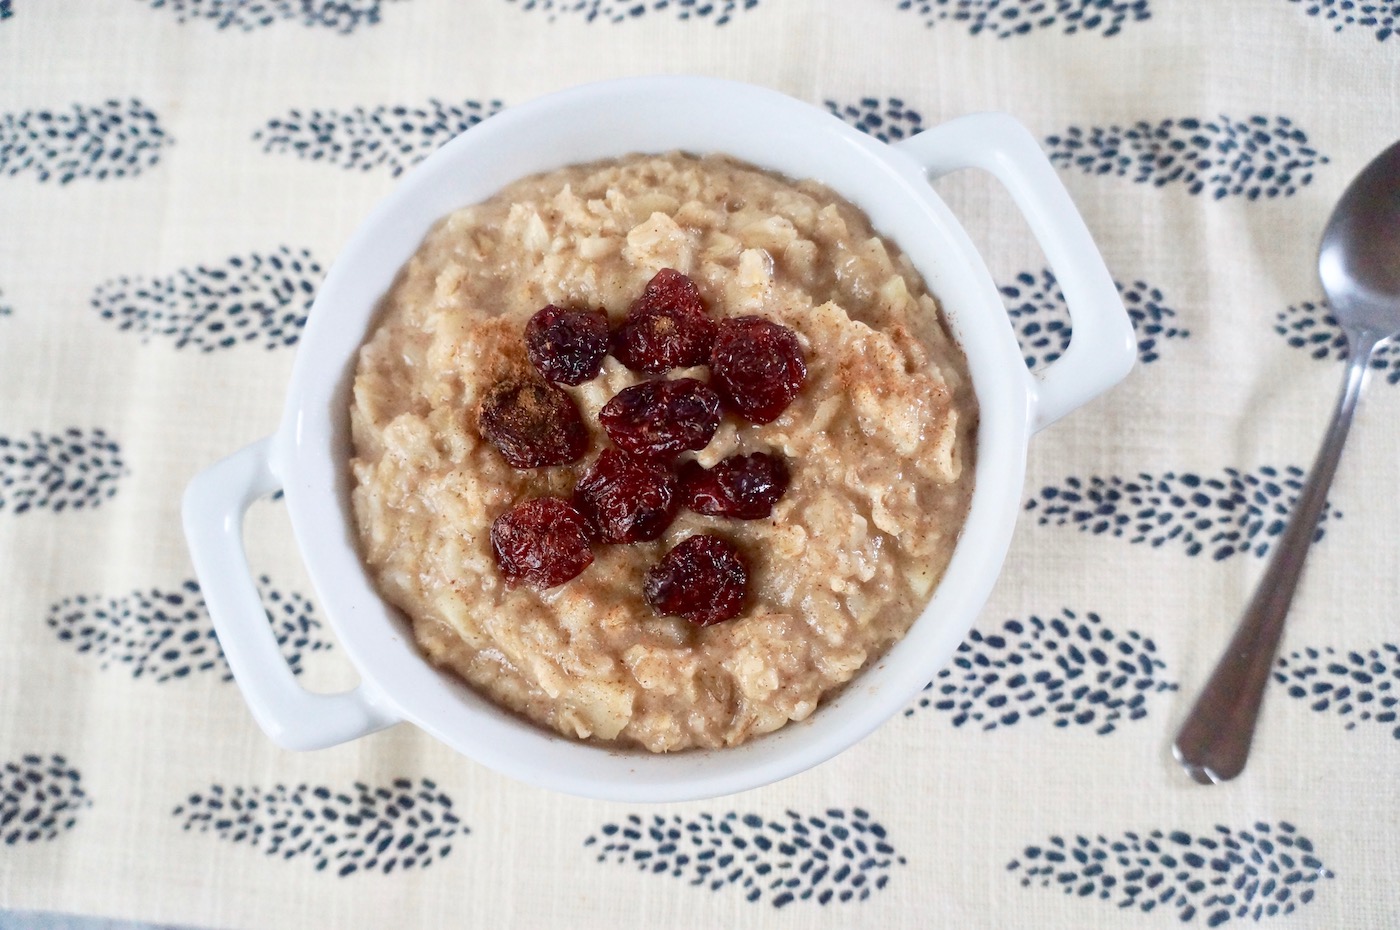 oatmeal with dried cranberries